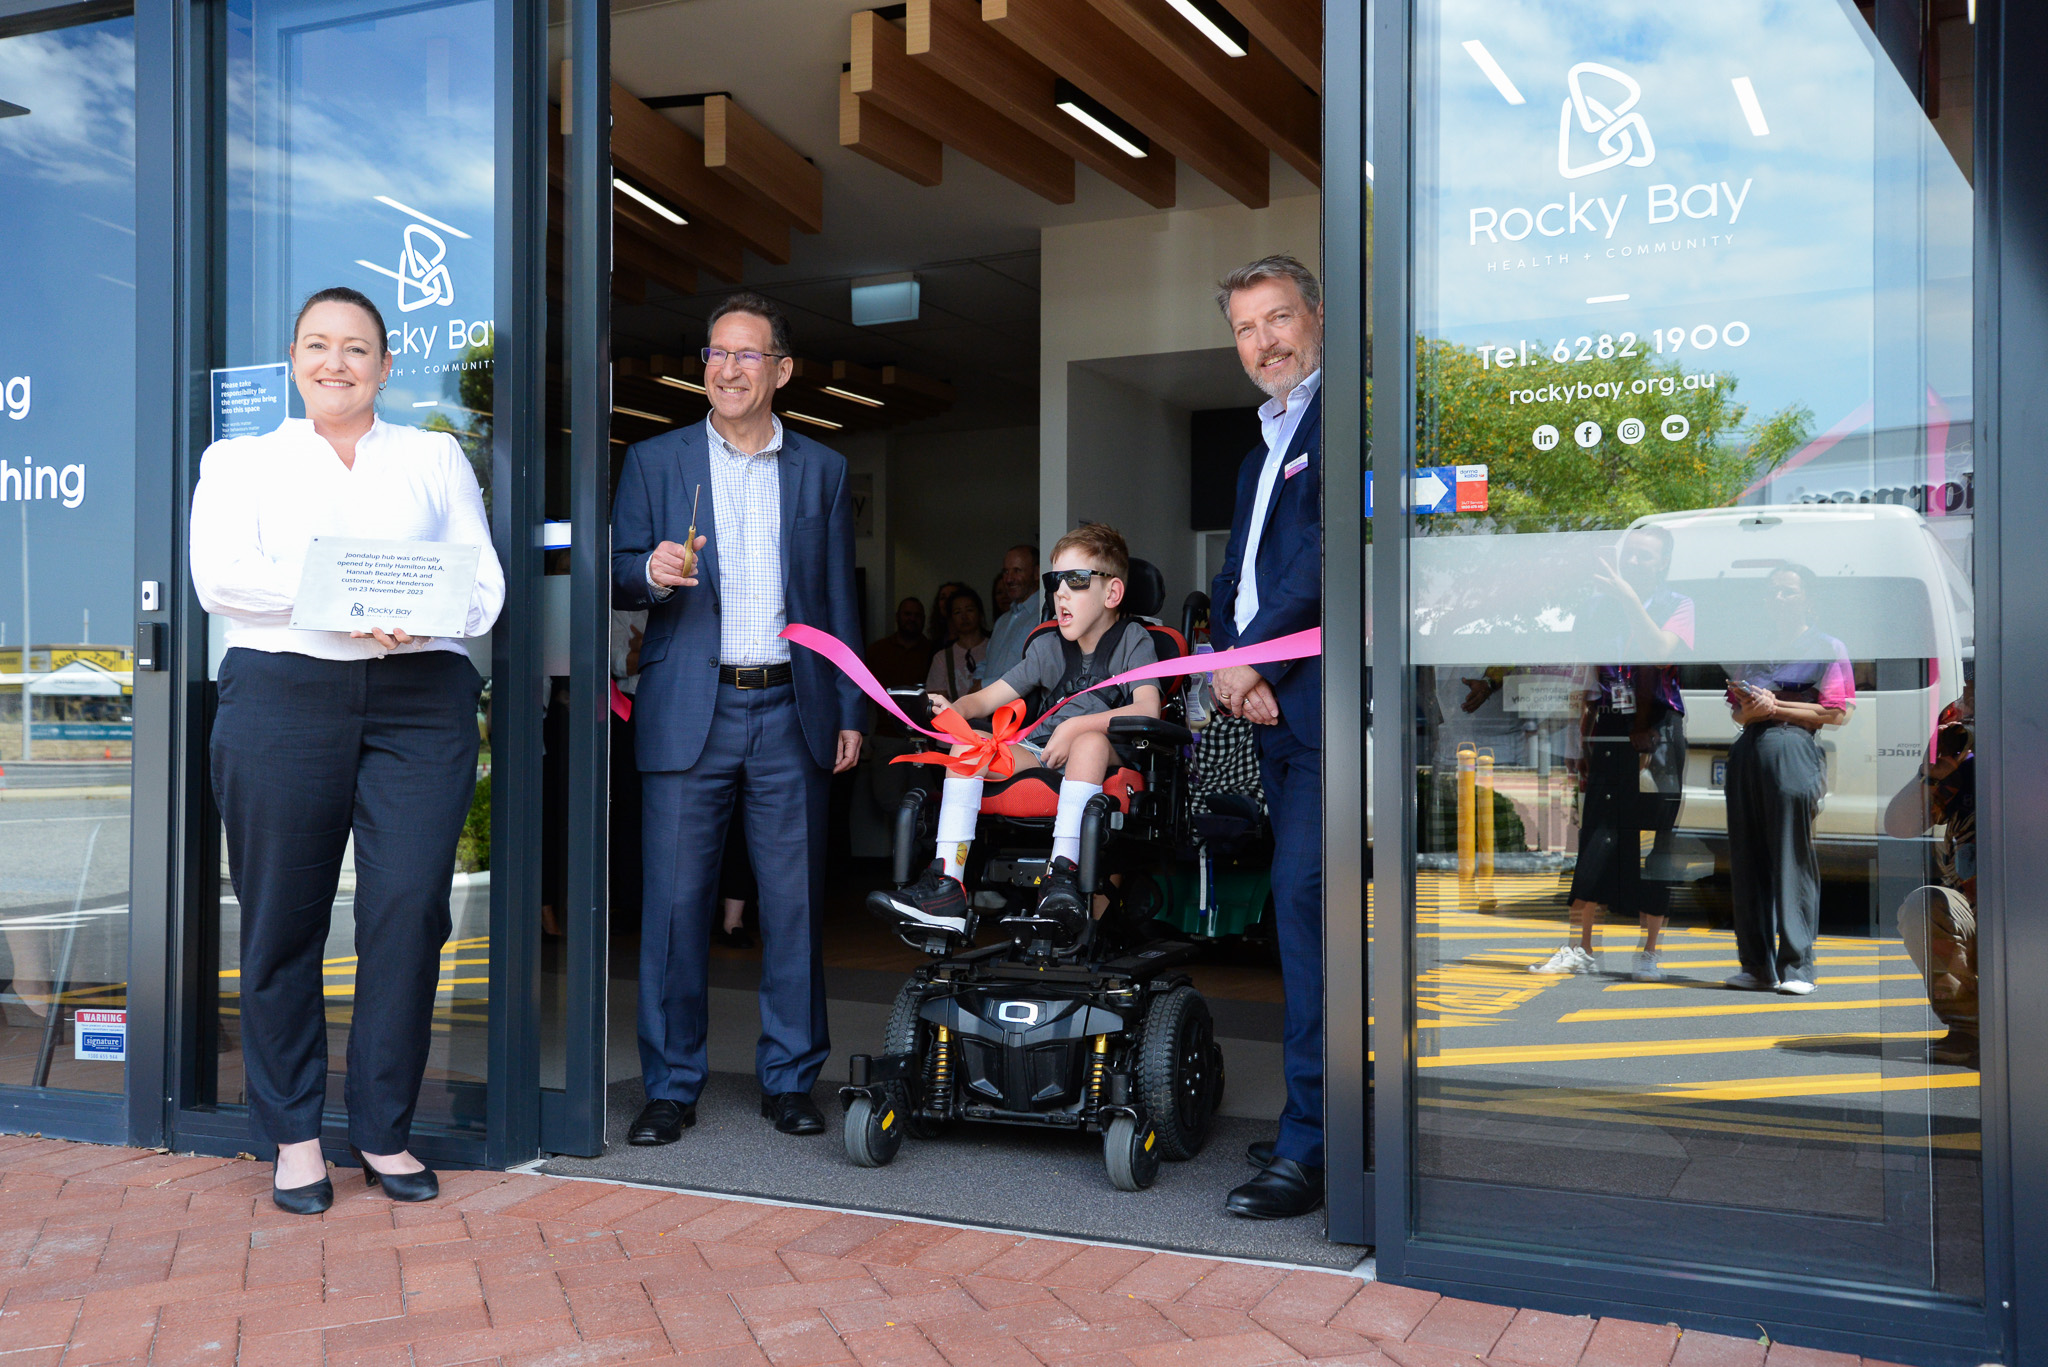 Emily Hamilton MLA Member for Joondalup, Rocky Bay Deputy Chair Paul Klein, Rocky Bay customer Knox and CEO Michael Tait officially open the Joondalup Hub by getting the ribbon.